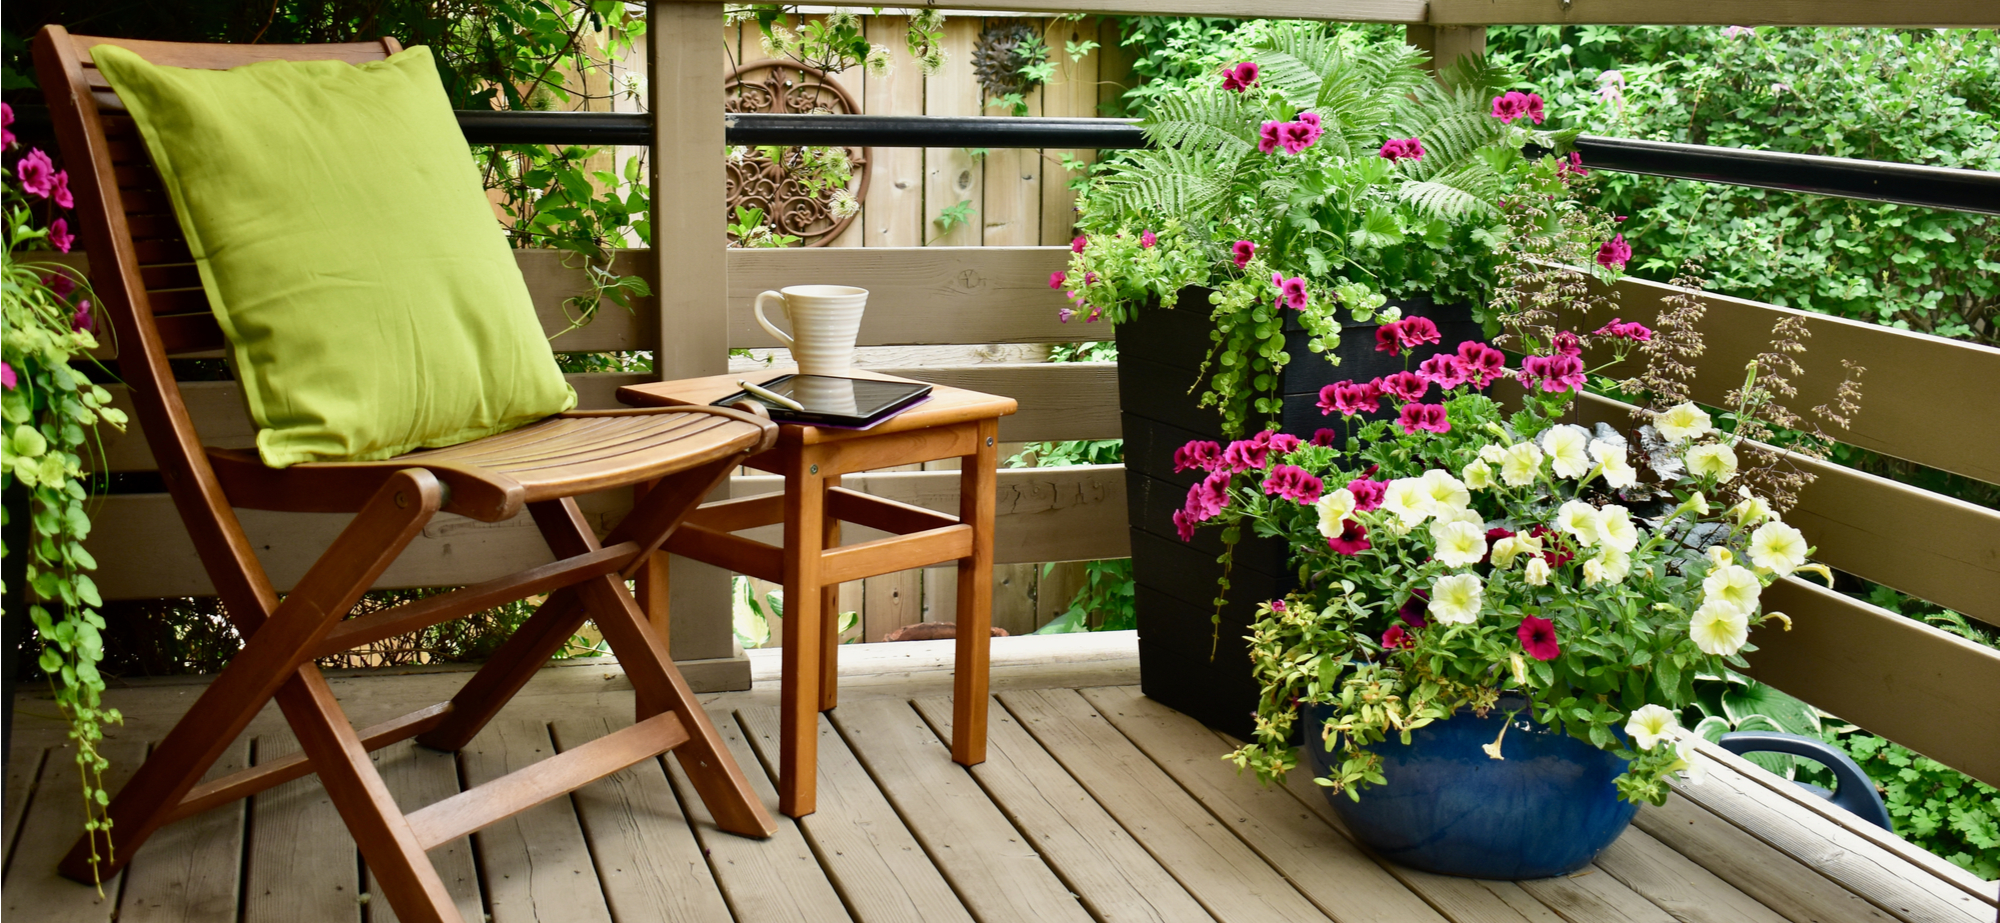 The Best Weather-Resistant Planters for Summertime